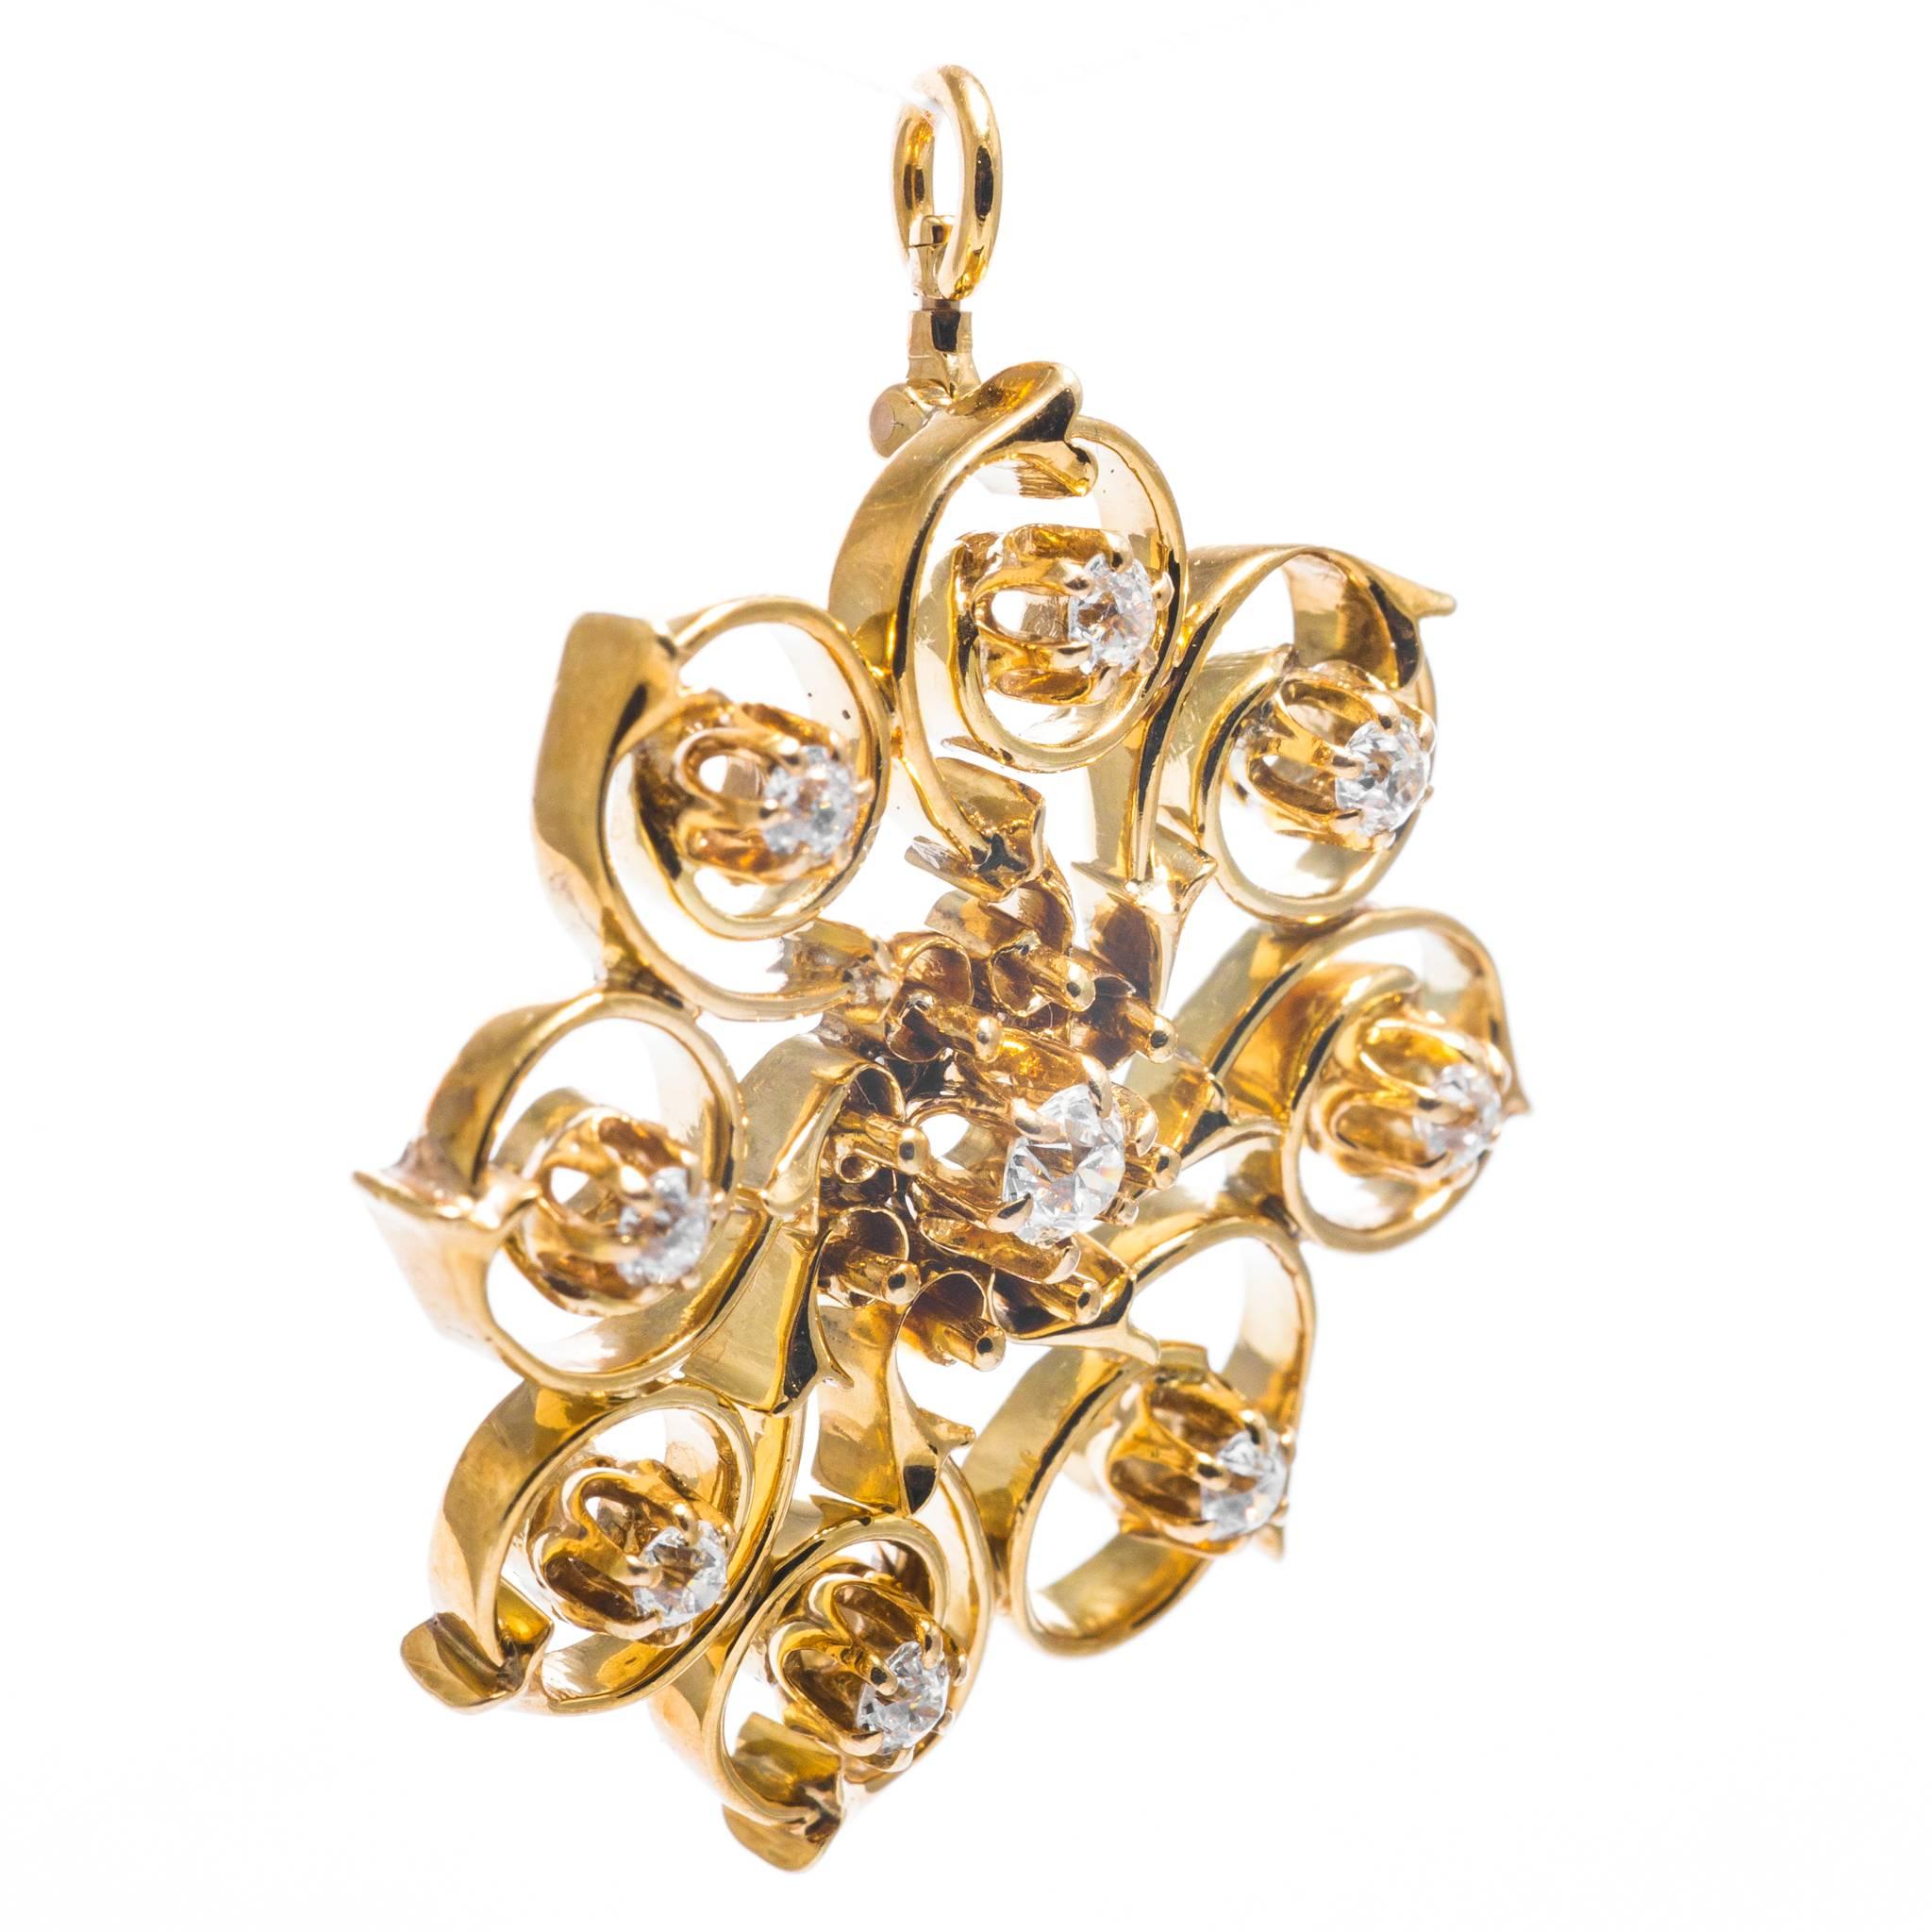 A beautiful swirl form diamond pendant necklace in 14 karat yellow gold.  Set with a total of nine high quality antique European cut diamonds this necklace has a truly entrancing and almost spinning appearance to it.

Centerin this necklace is a